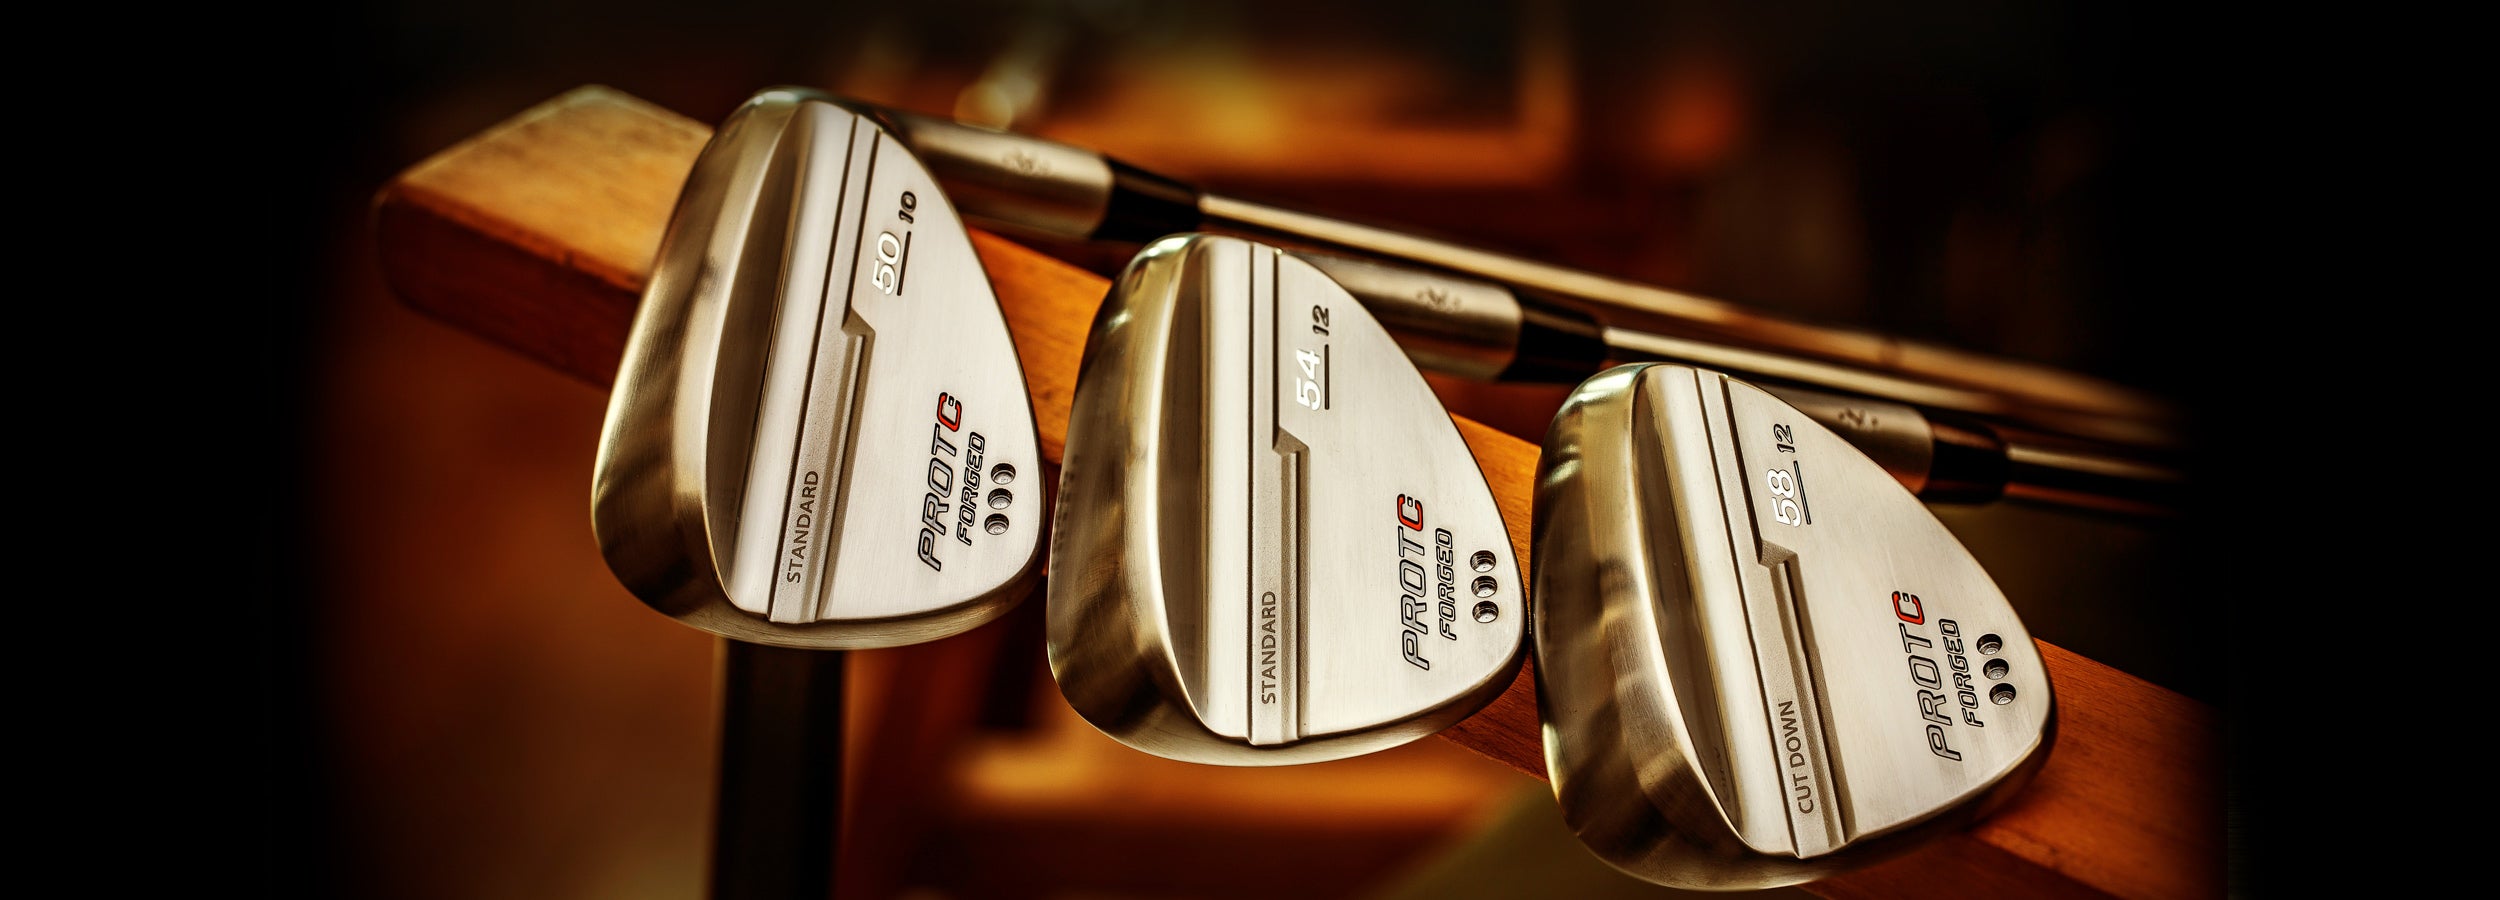 PROTOCONCEPT Golf, Protoconcept Wedge, Golf Wedge, Forged wedge, golf wedge